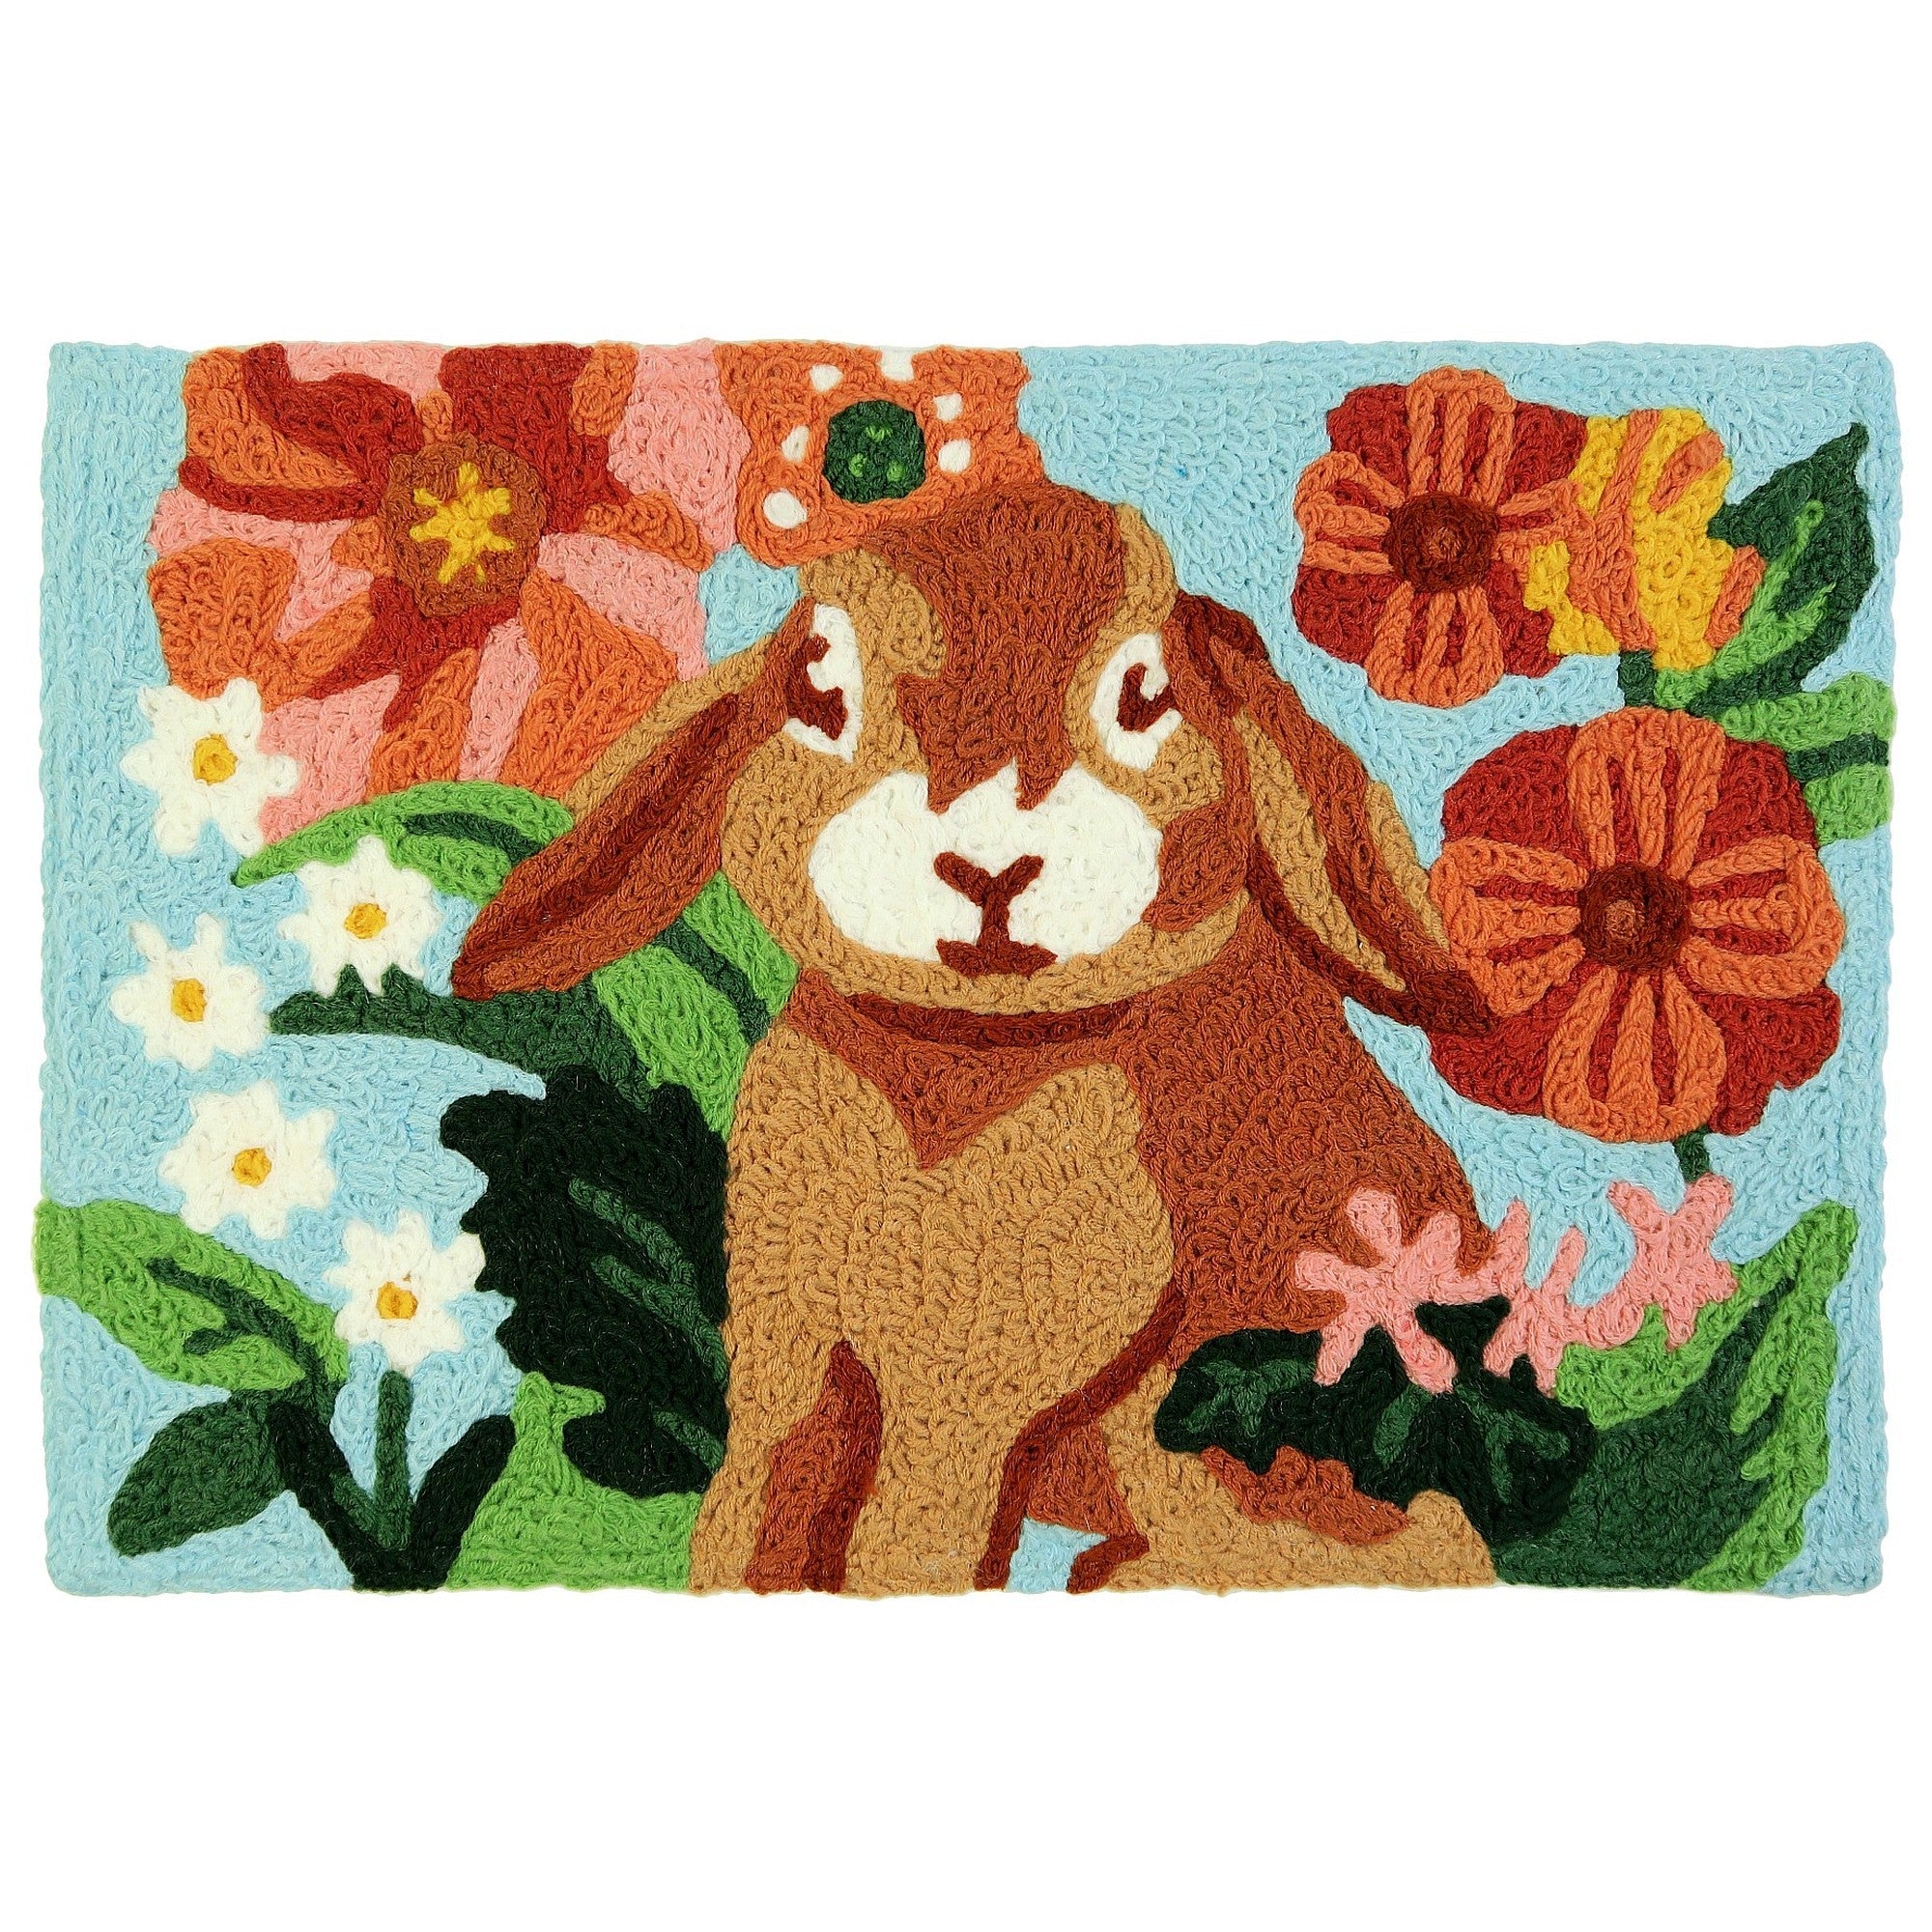 Jellybean Woof Woof 20x30 Washable Accent Rug